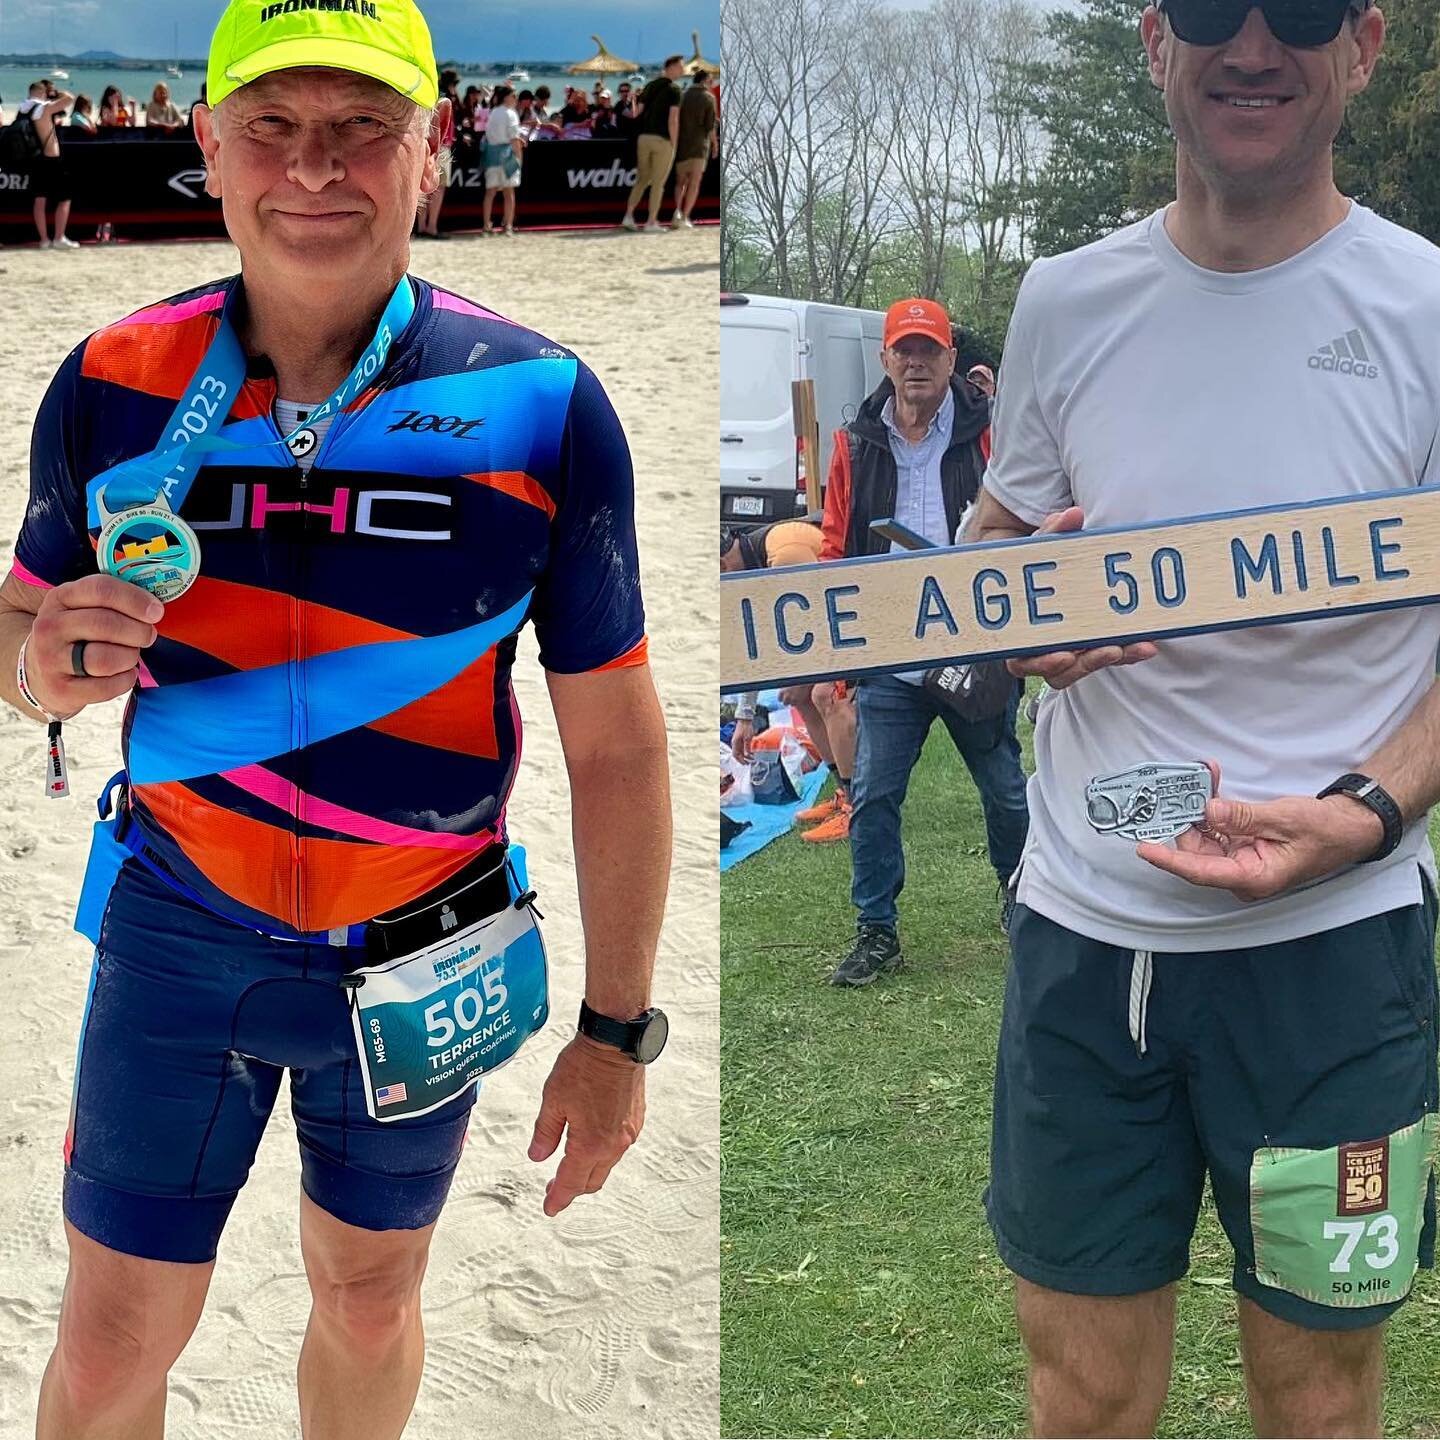 It was a big Mother&rsquo;s Day weekend!

@lukaplakia716 completed the longest race of his running career at The Ice Age 50. This race is the start of his story this year. He will continue the ultra path looking to set his sights on the Leadville 100